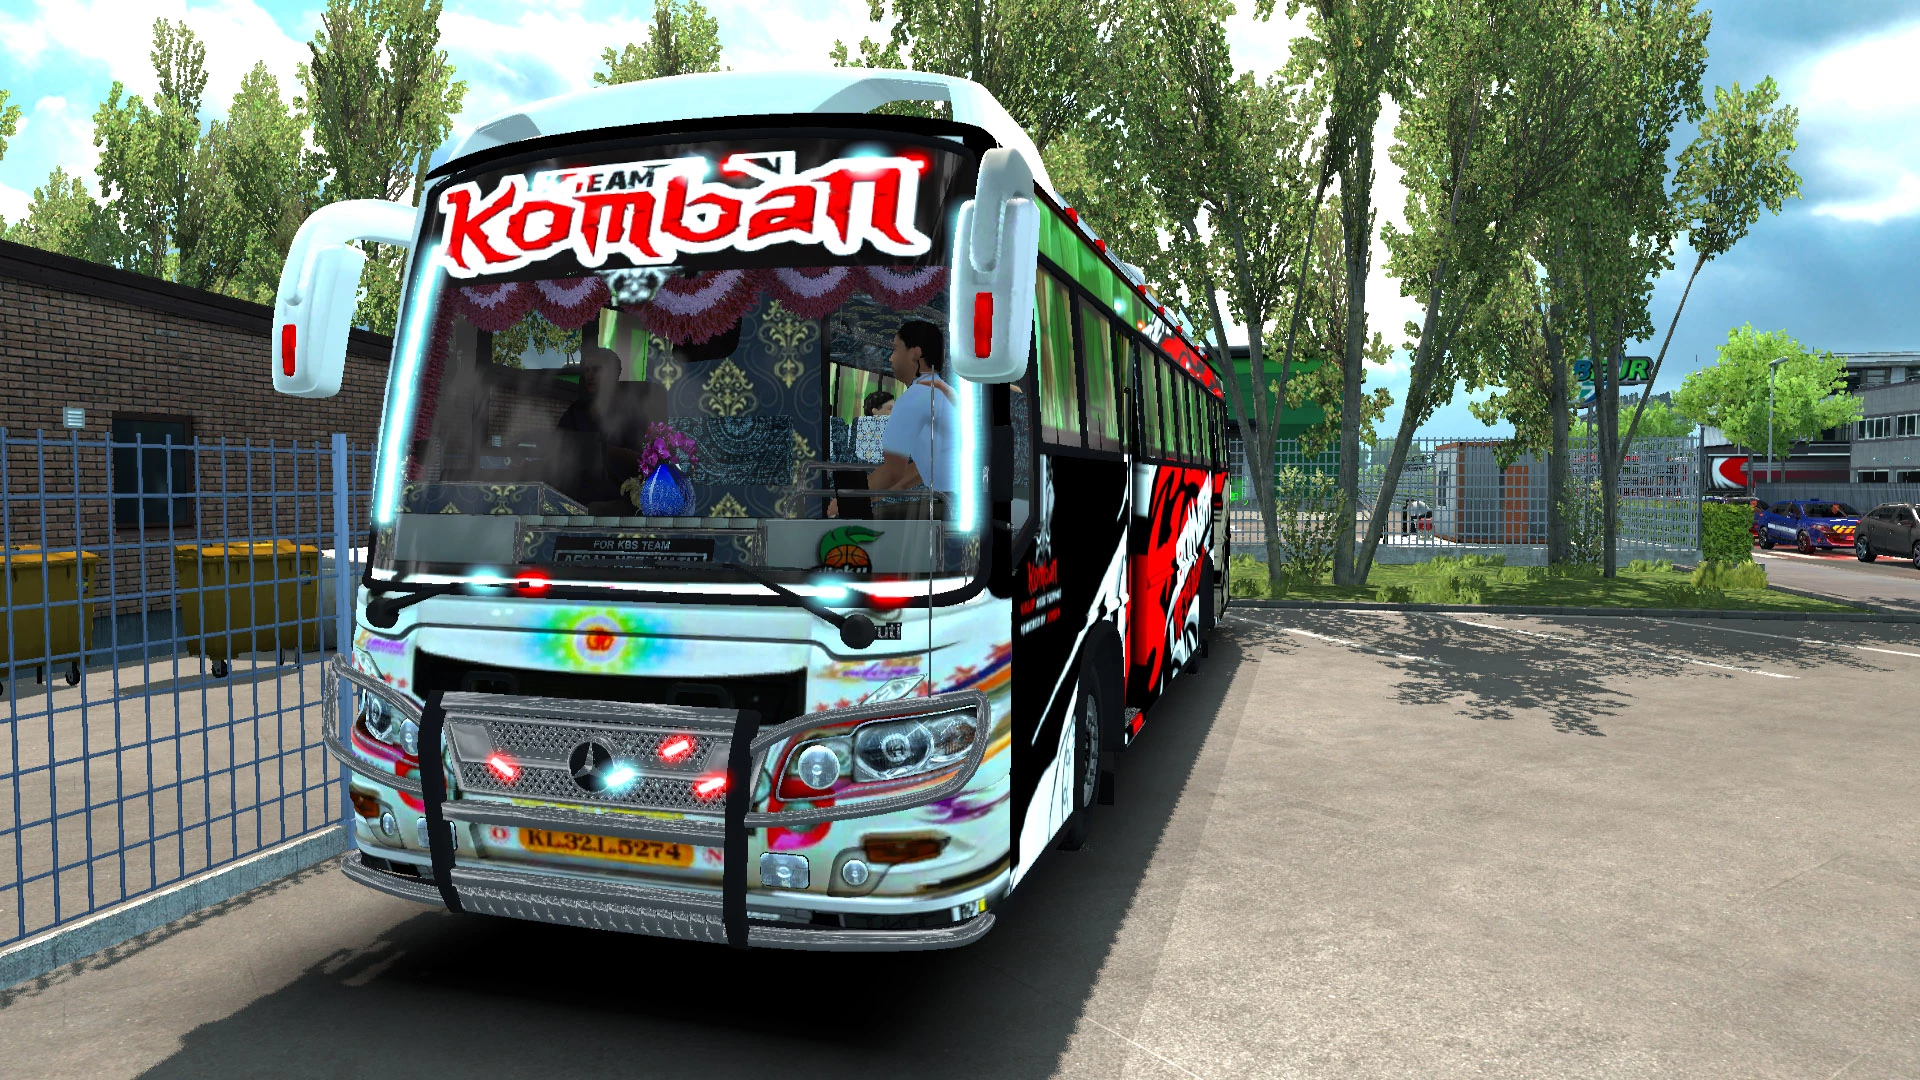 Komban Bus Skin 5 In 1 Pack Marutiv2 Ets 2 Browse and download minecraft tubbo skins by the planet minecraft community. komban bus skin 5 in 1 pack marutiv2